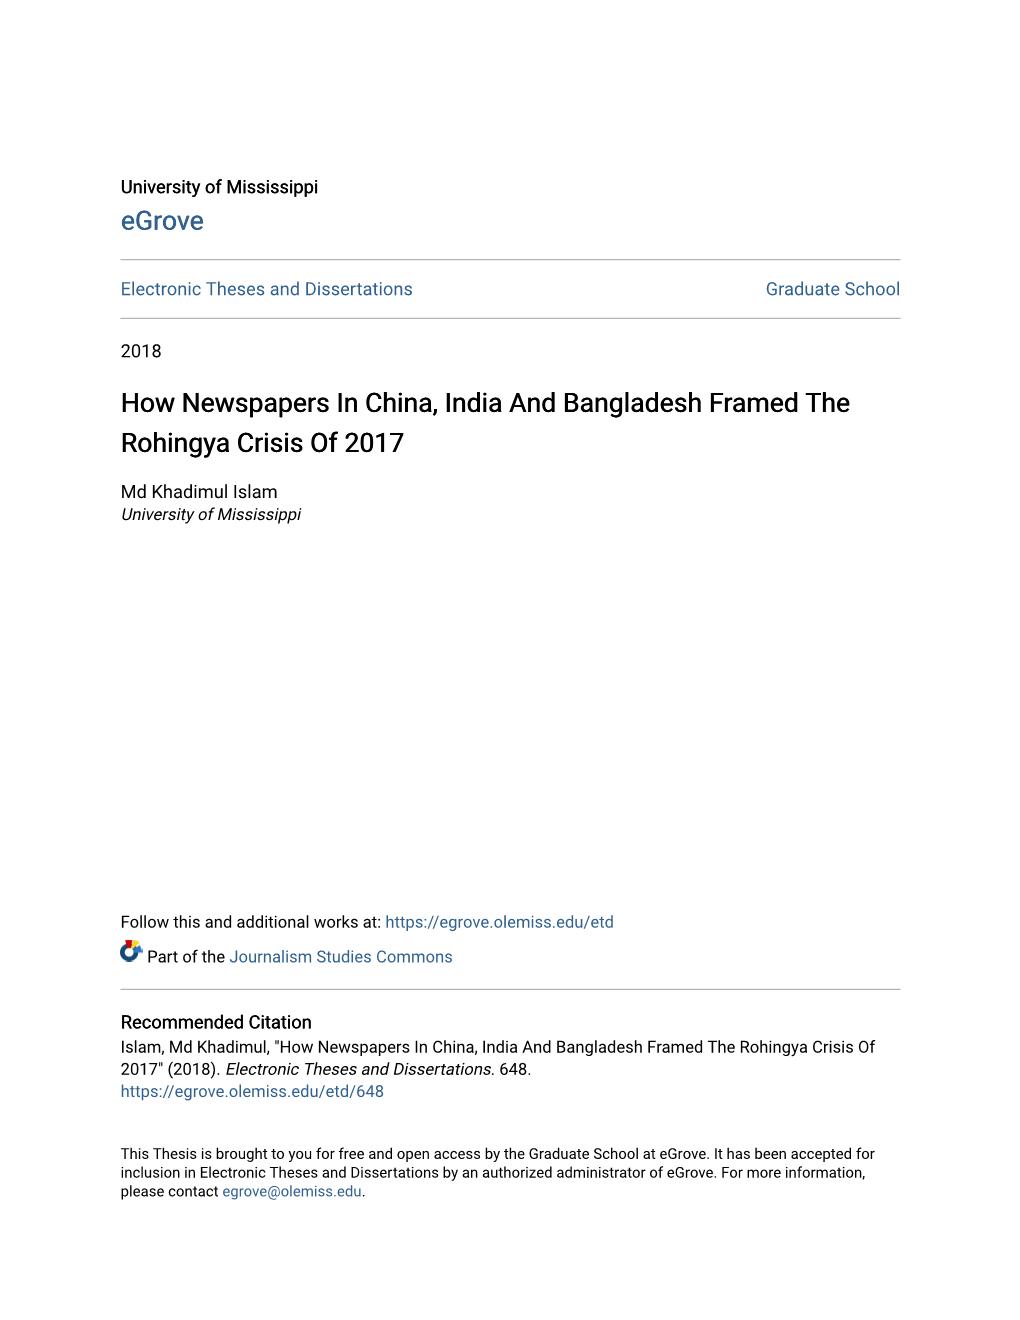 How Newspapers in China, India and Bangladesh Framed the Rohingya Crisis of 2017